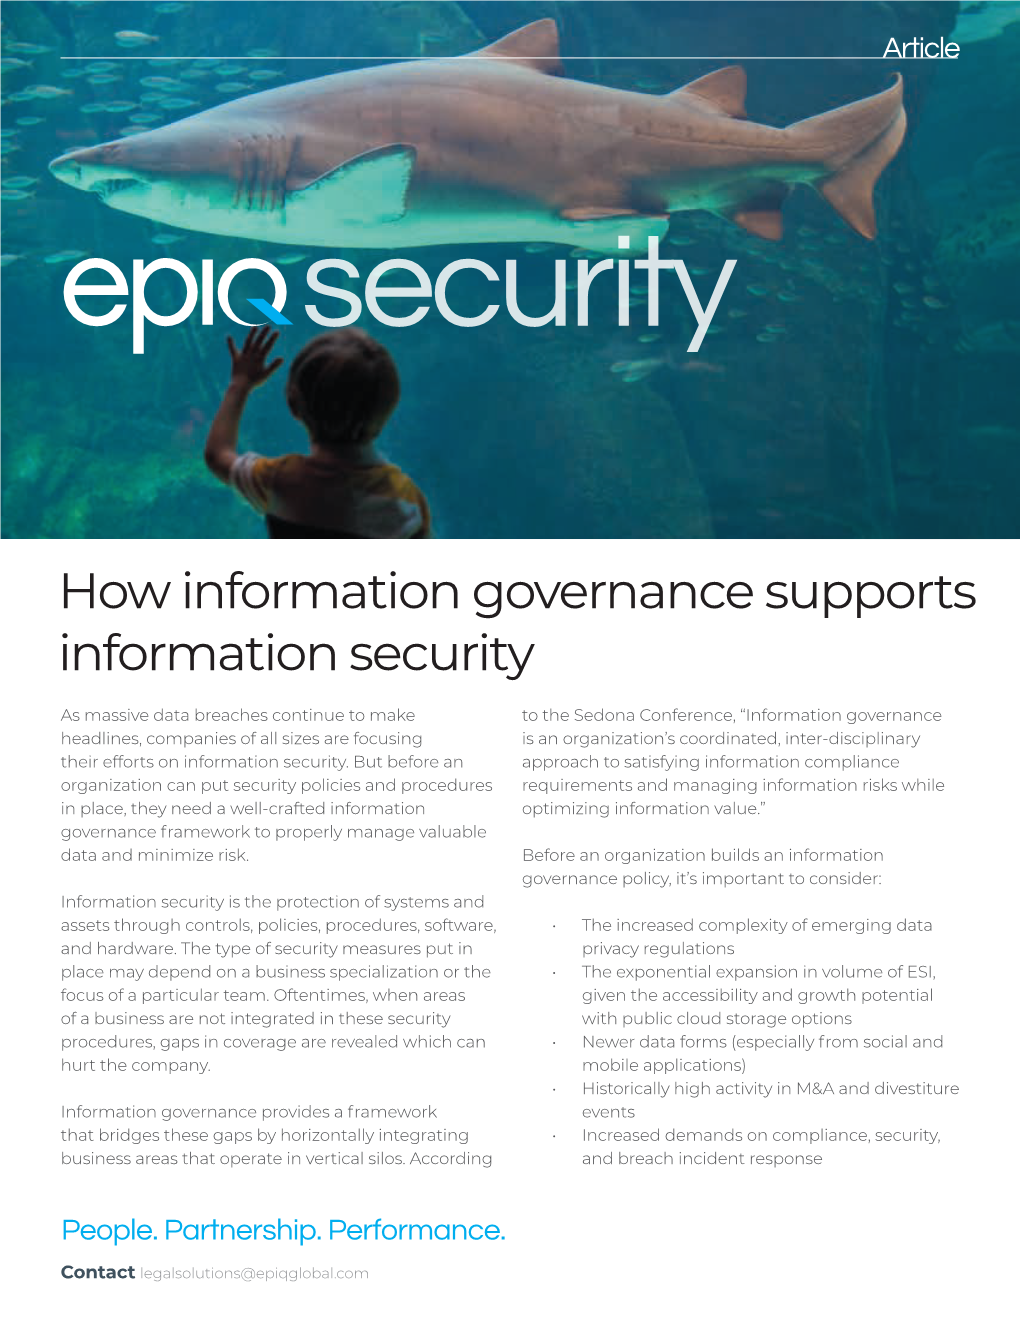 How Information Governance Supports Information Security